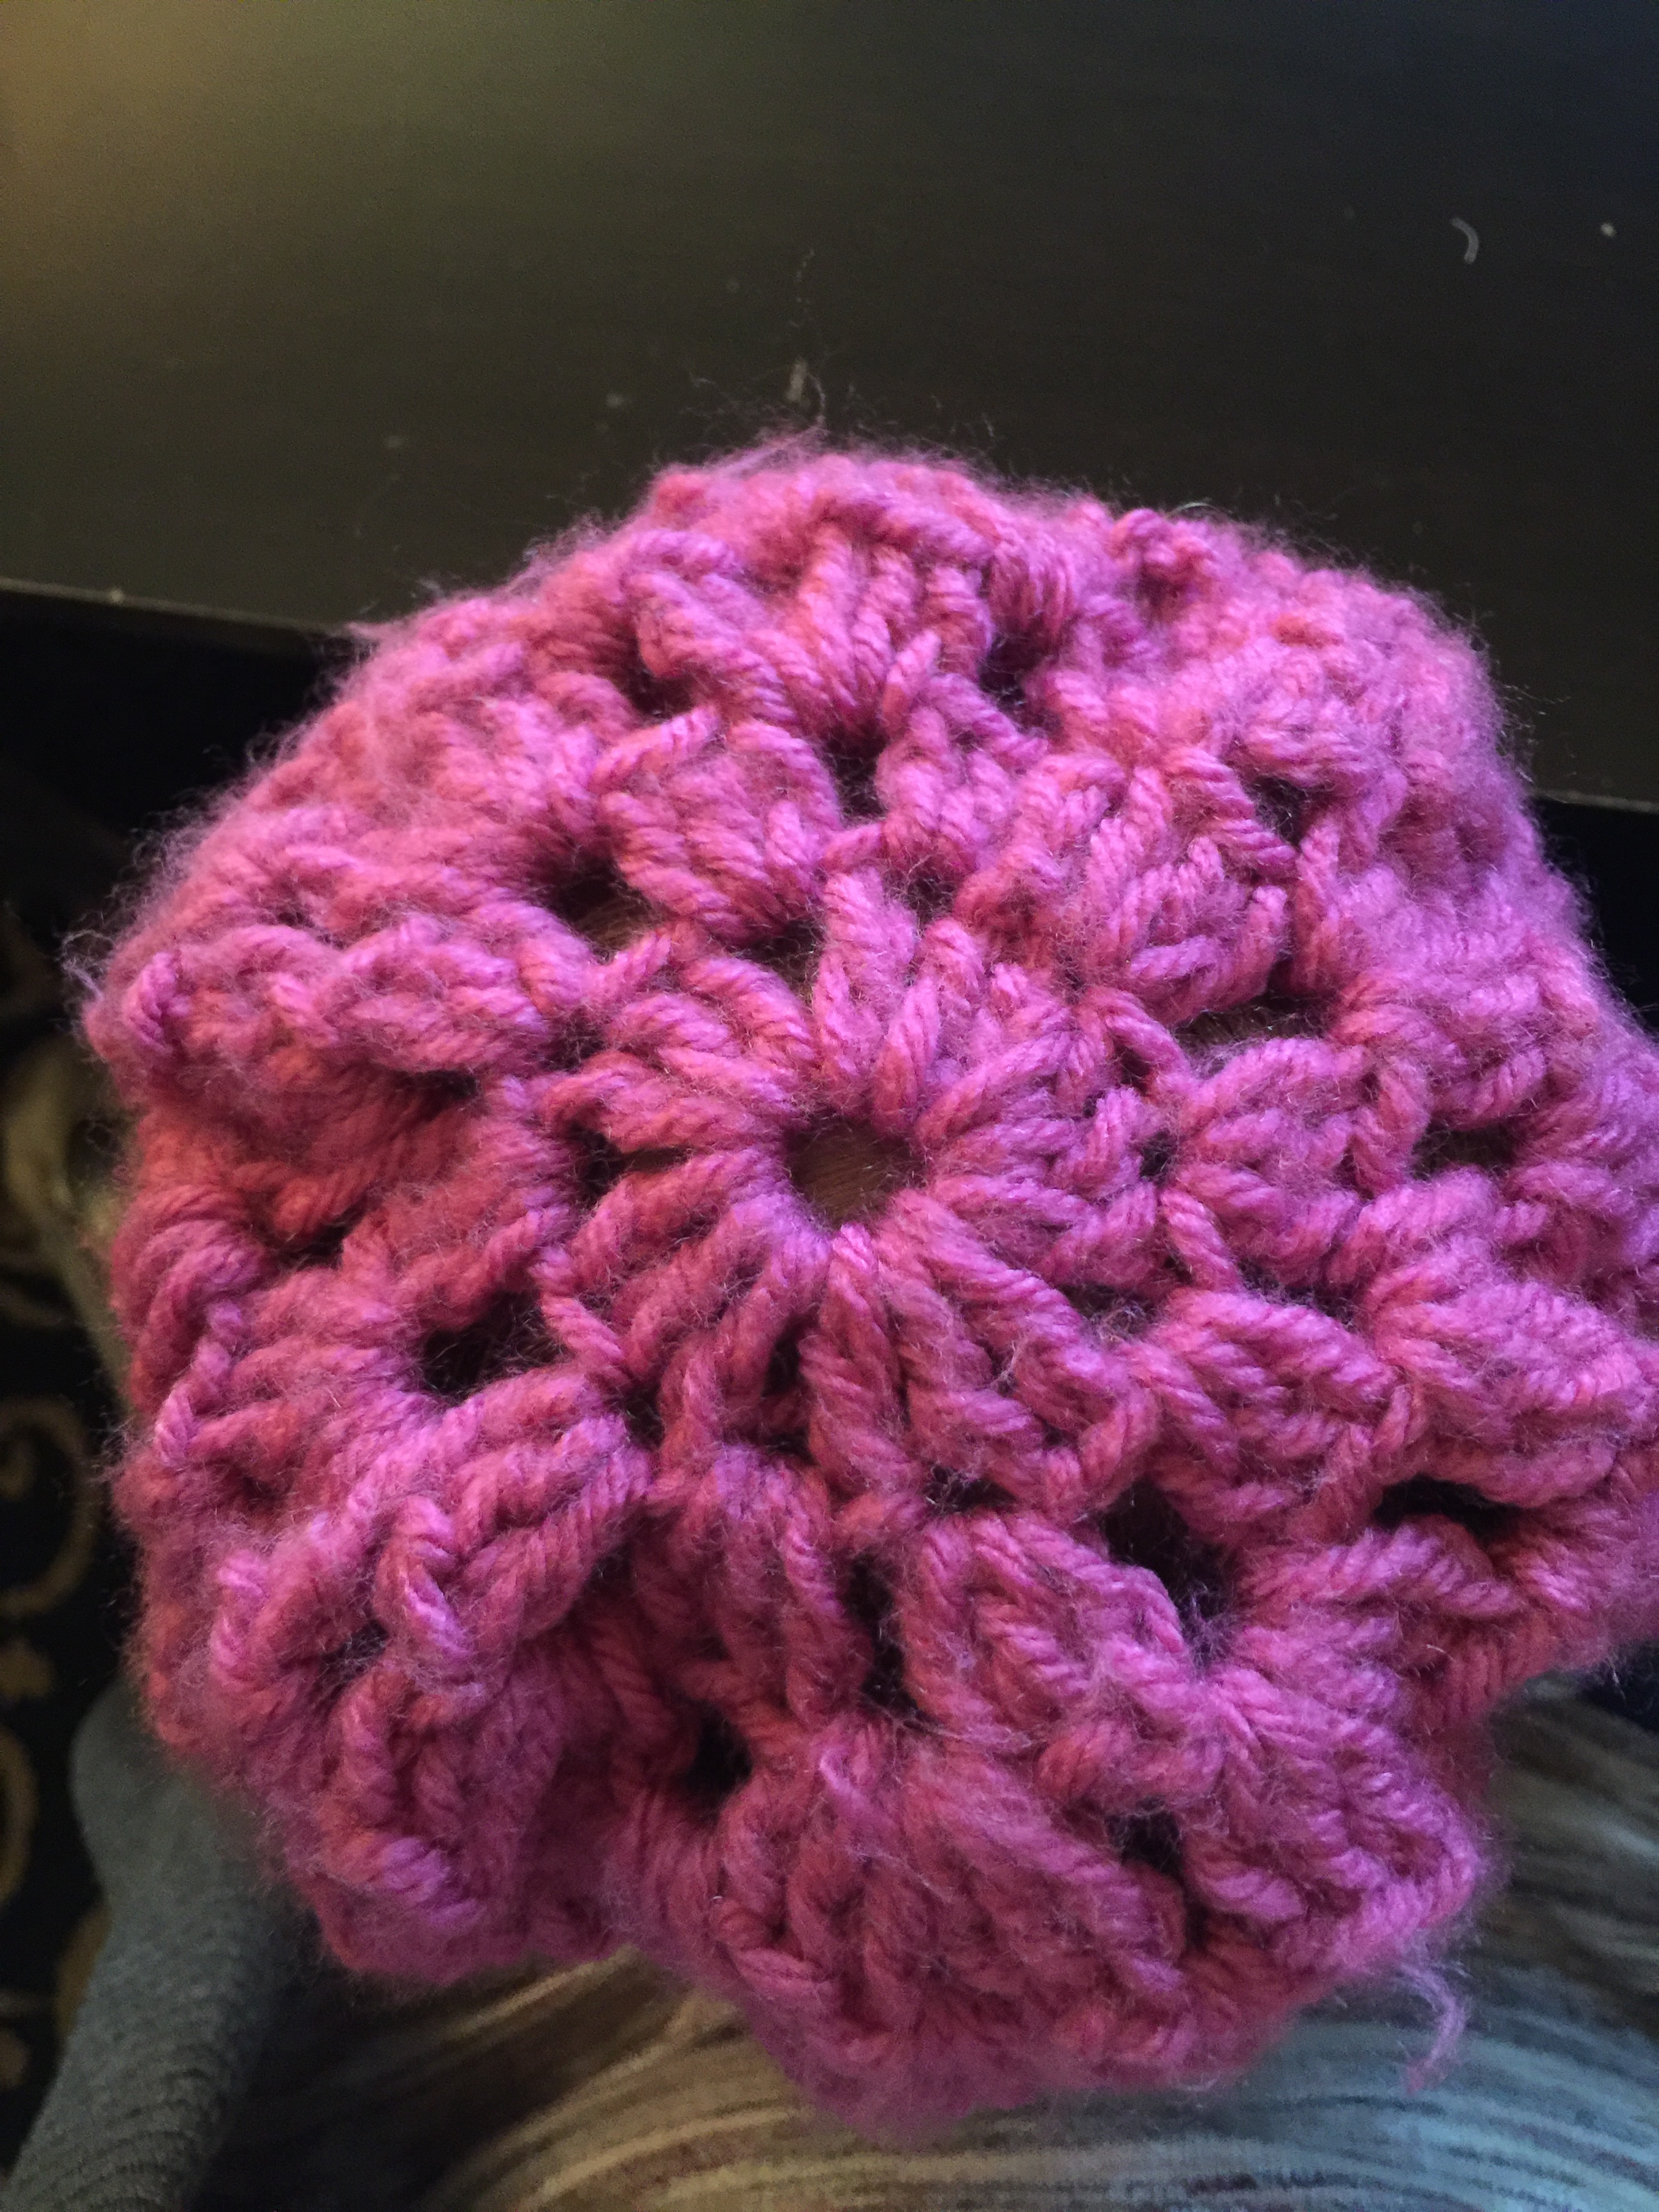 Top of Slouchy Beret